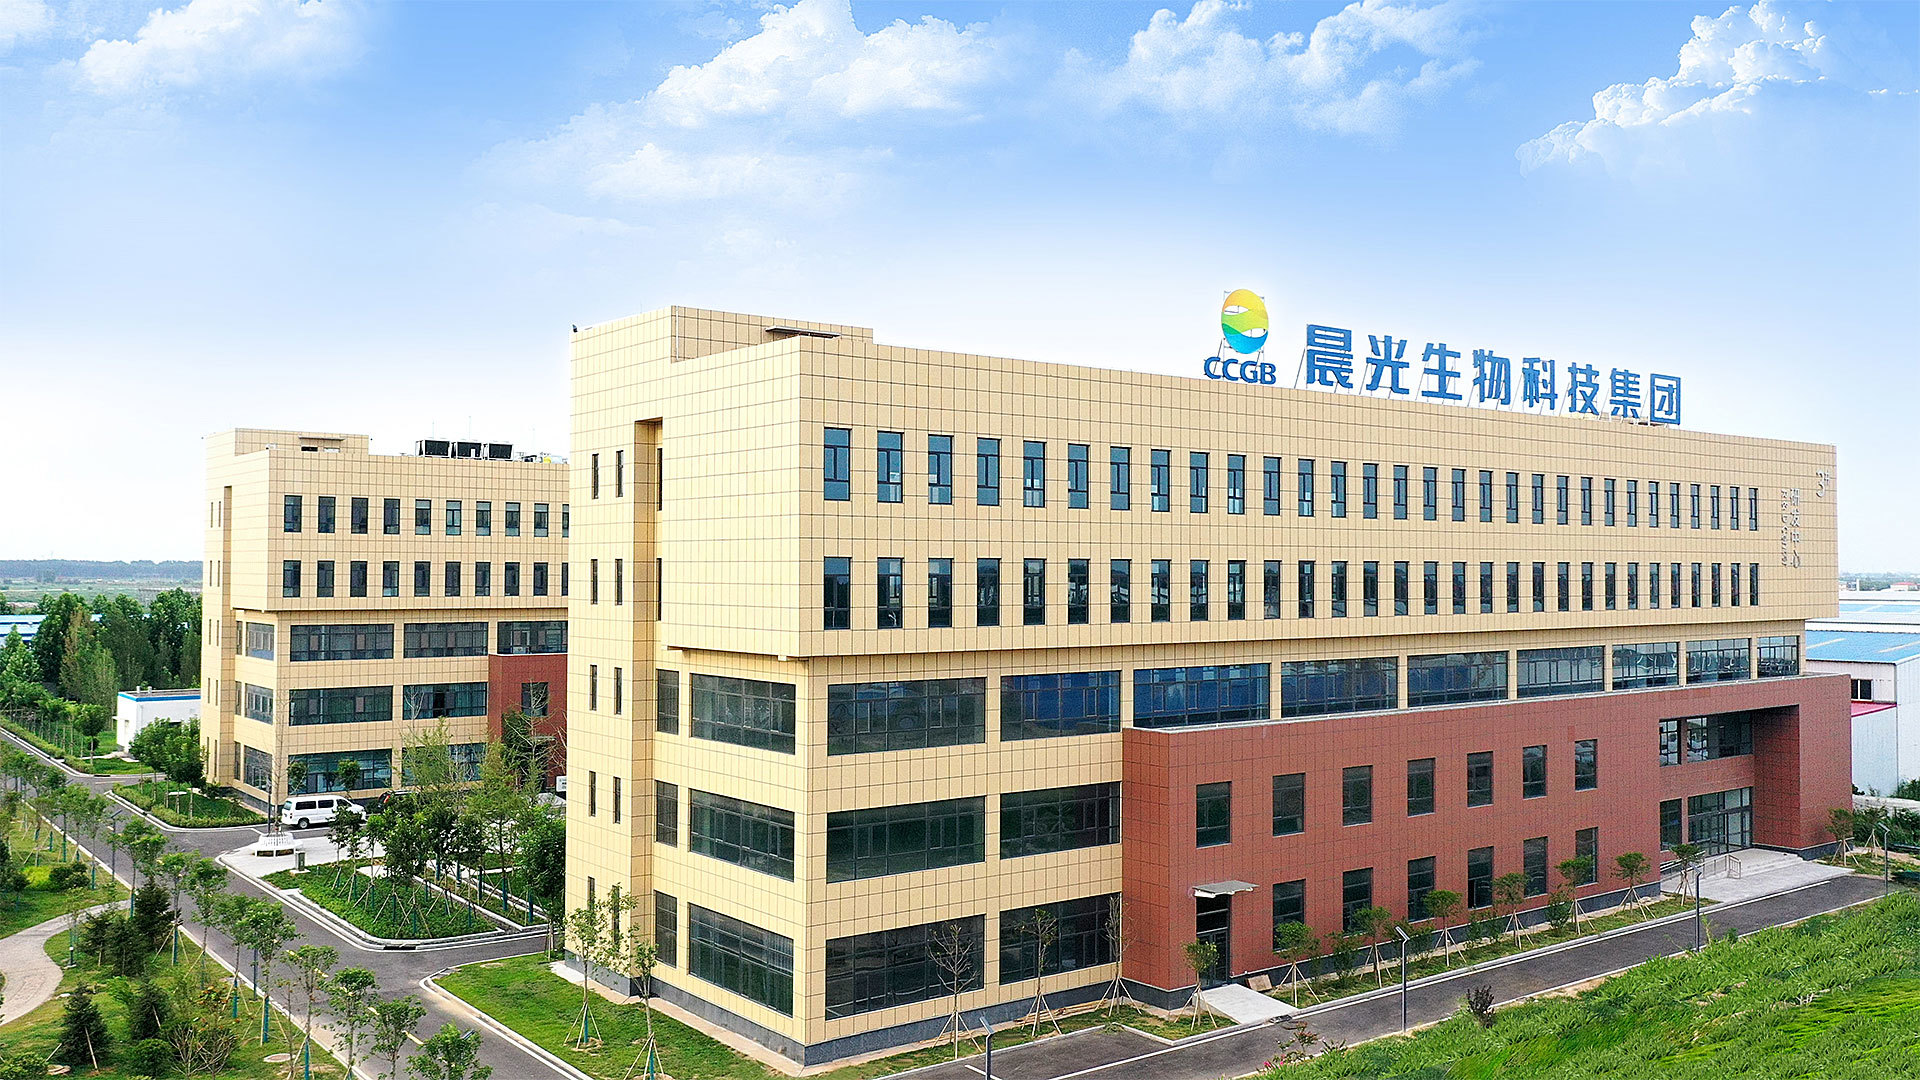 Welcome To Chenguang Biotech Group